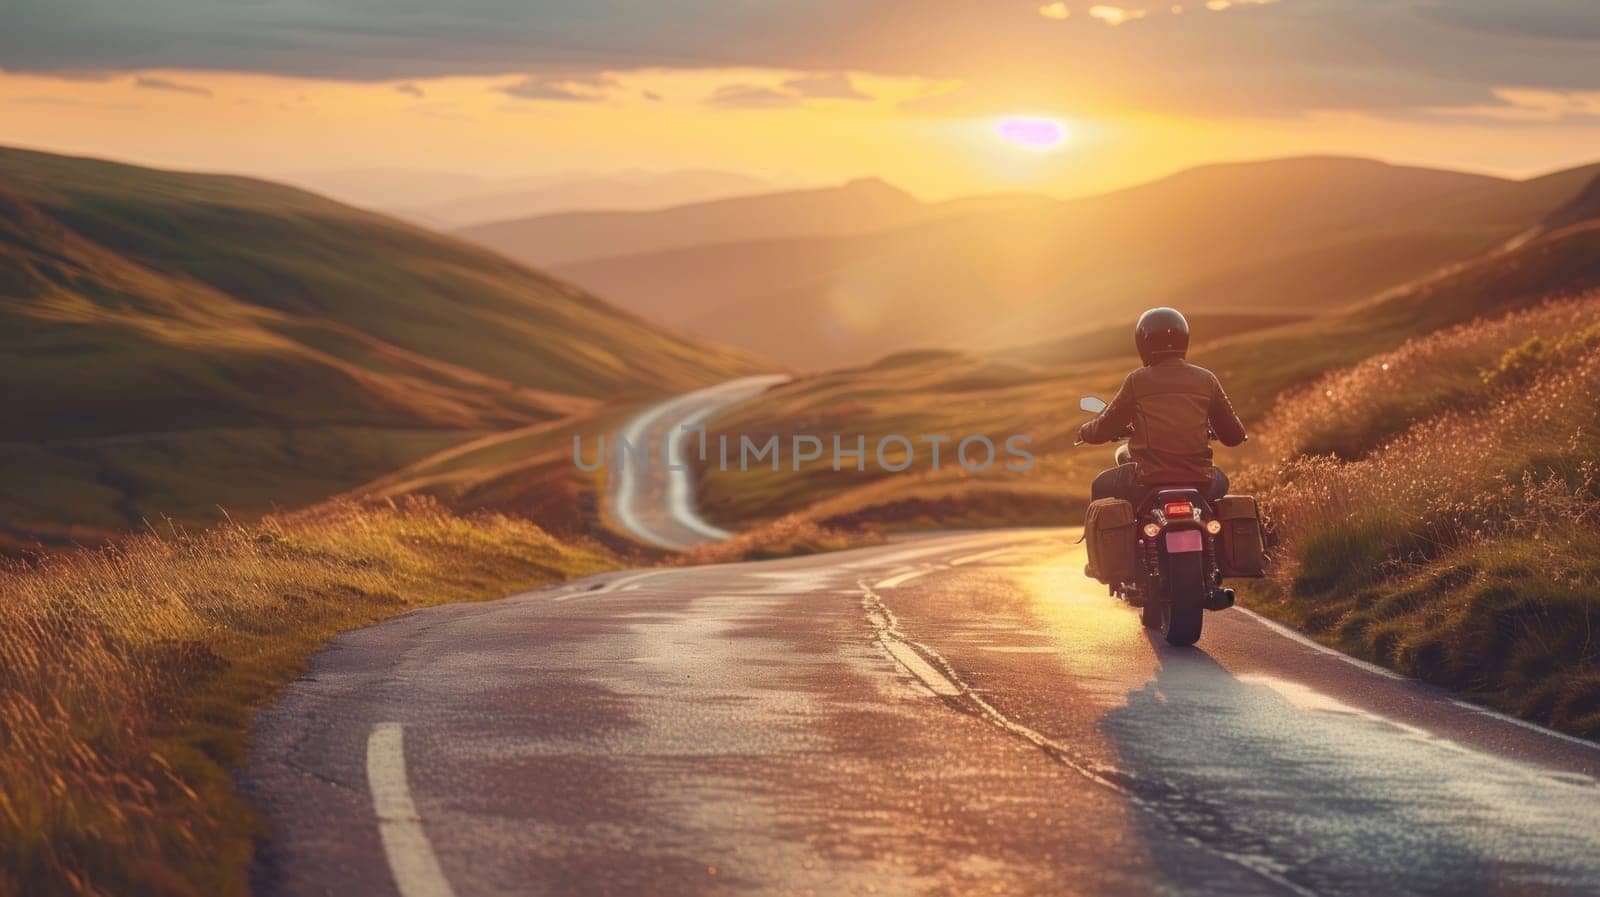 A motorcyclist taking a break on a winding country road.